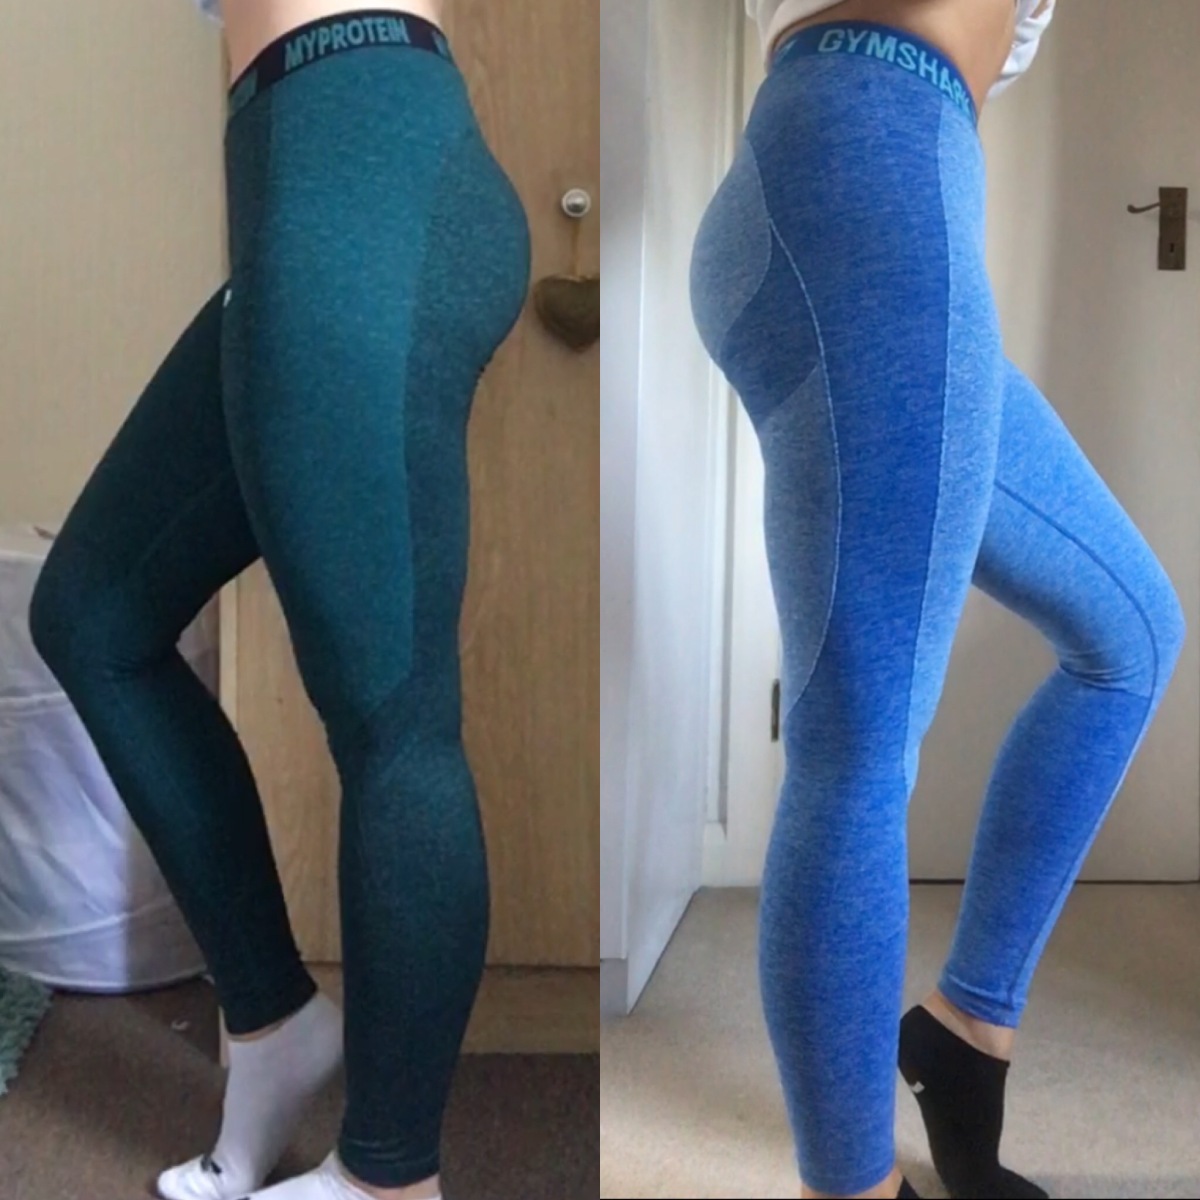 MYPROTEIN Activewear Review, Composure Set, Power Cross Sports Bra,  Graphic Leggings